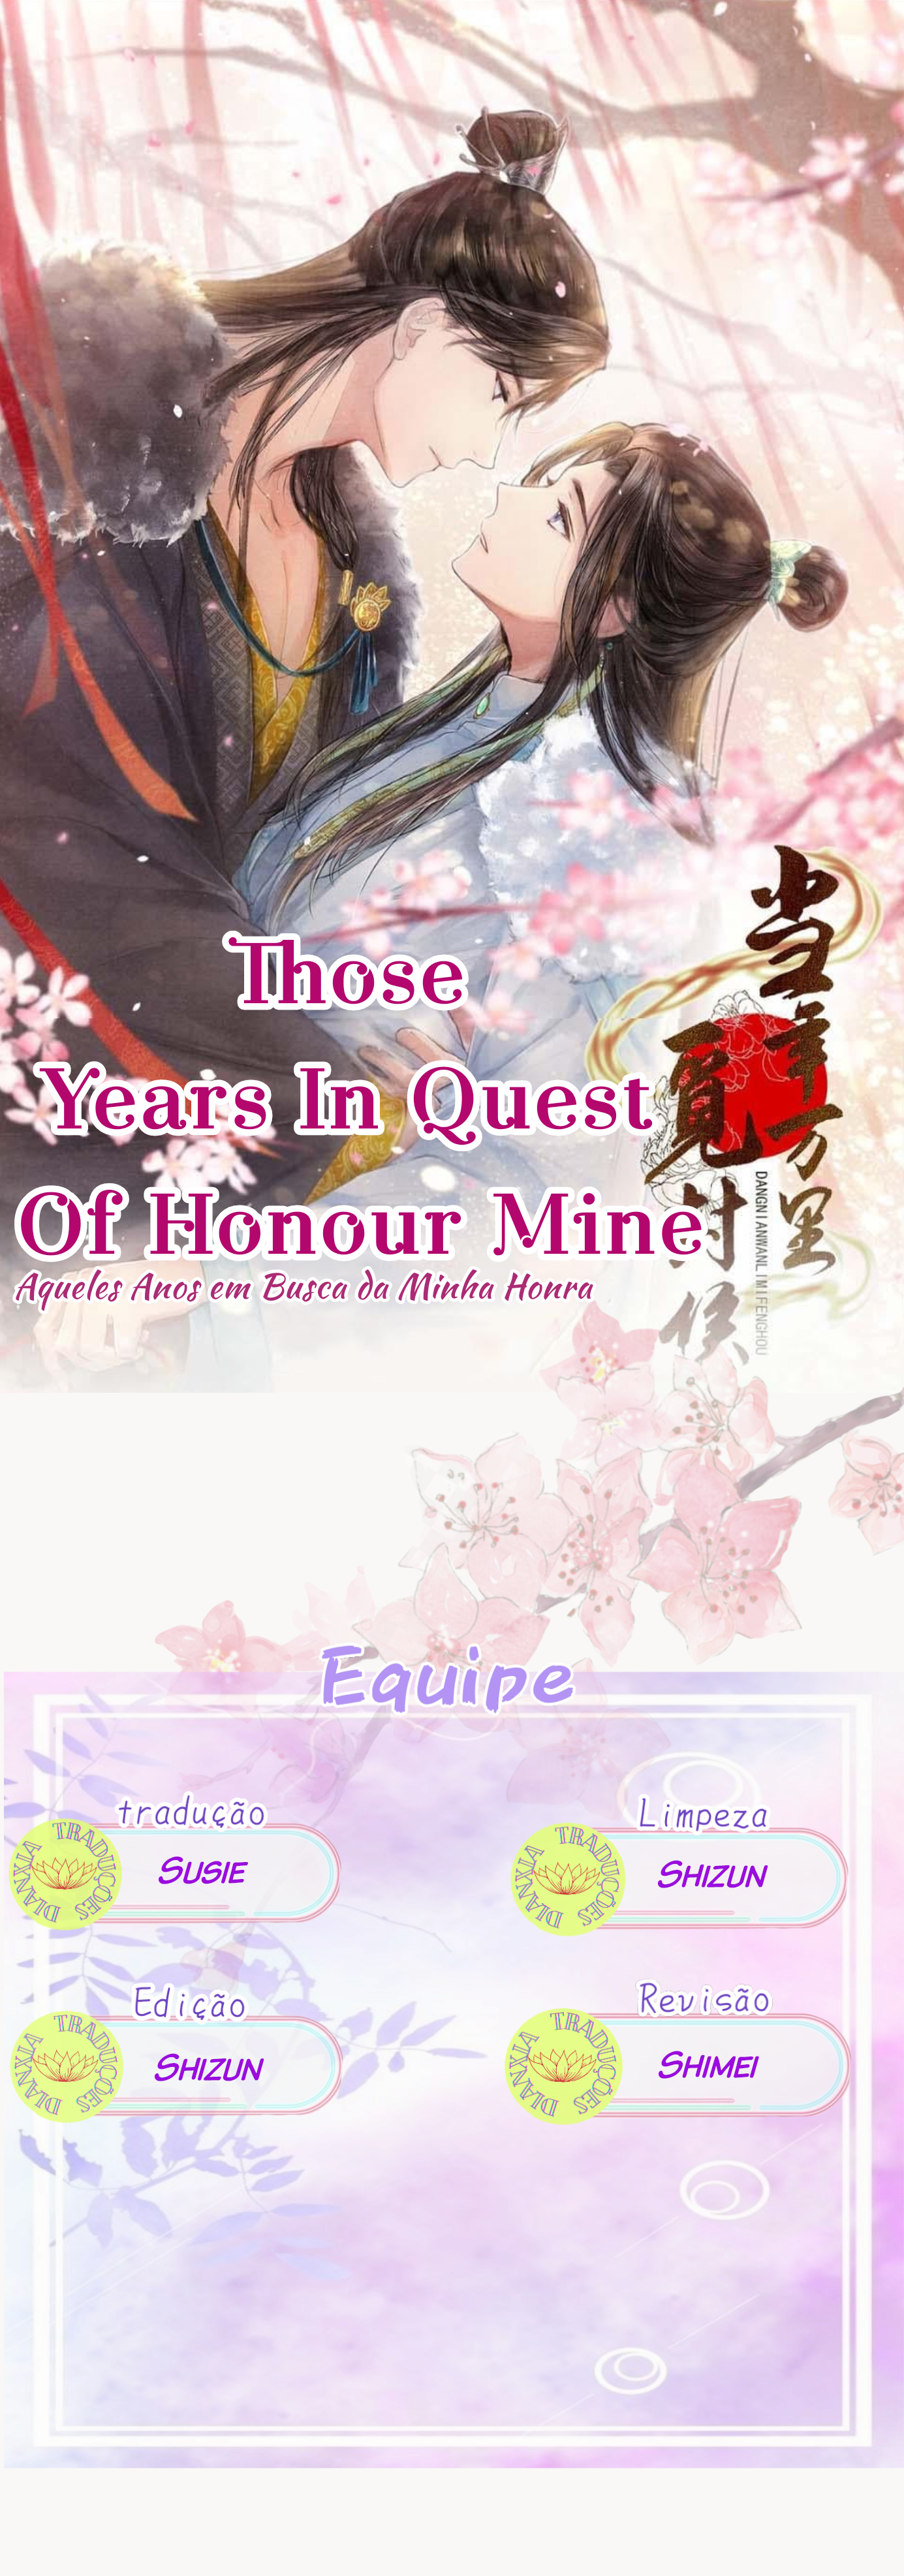 Those Years In Quest Of Honour Mine Manga